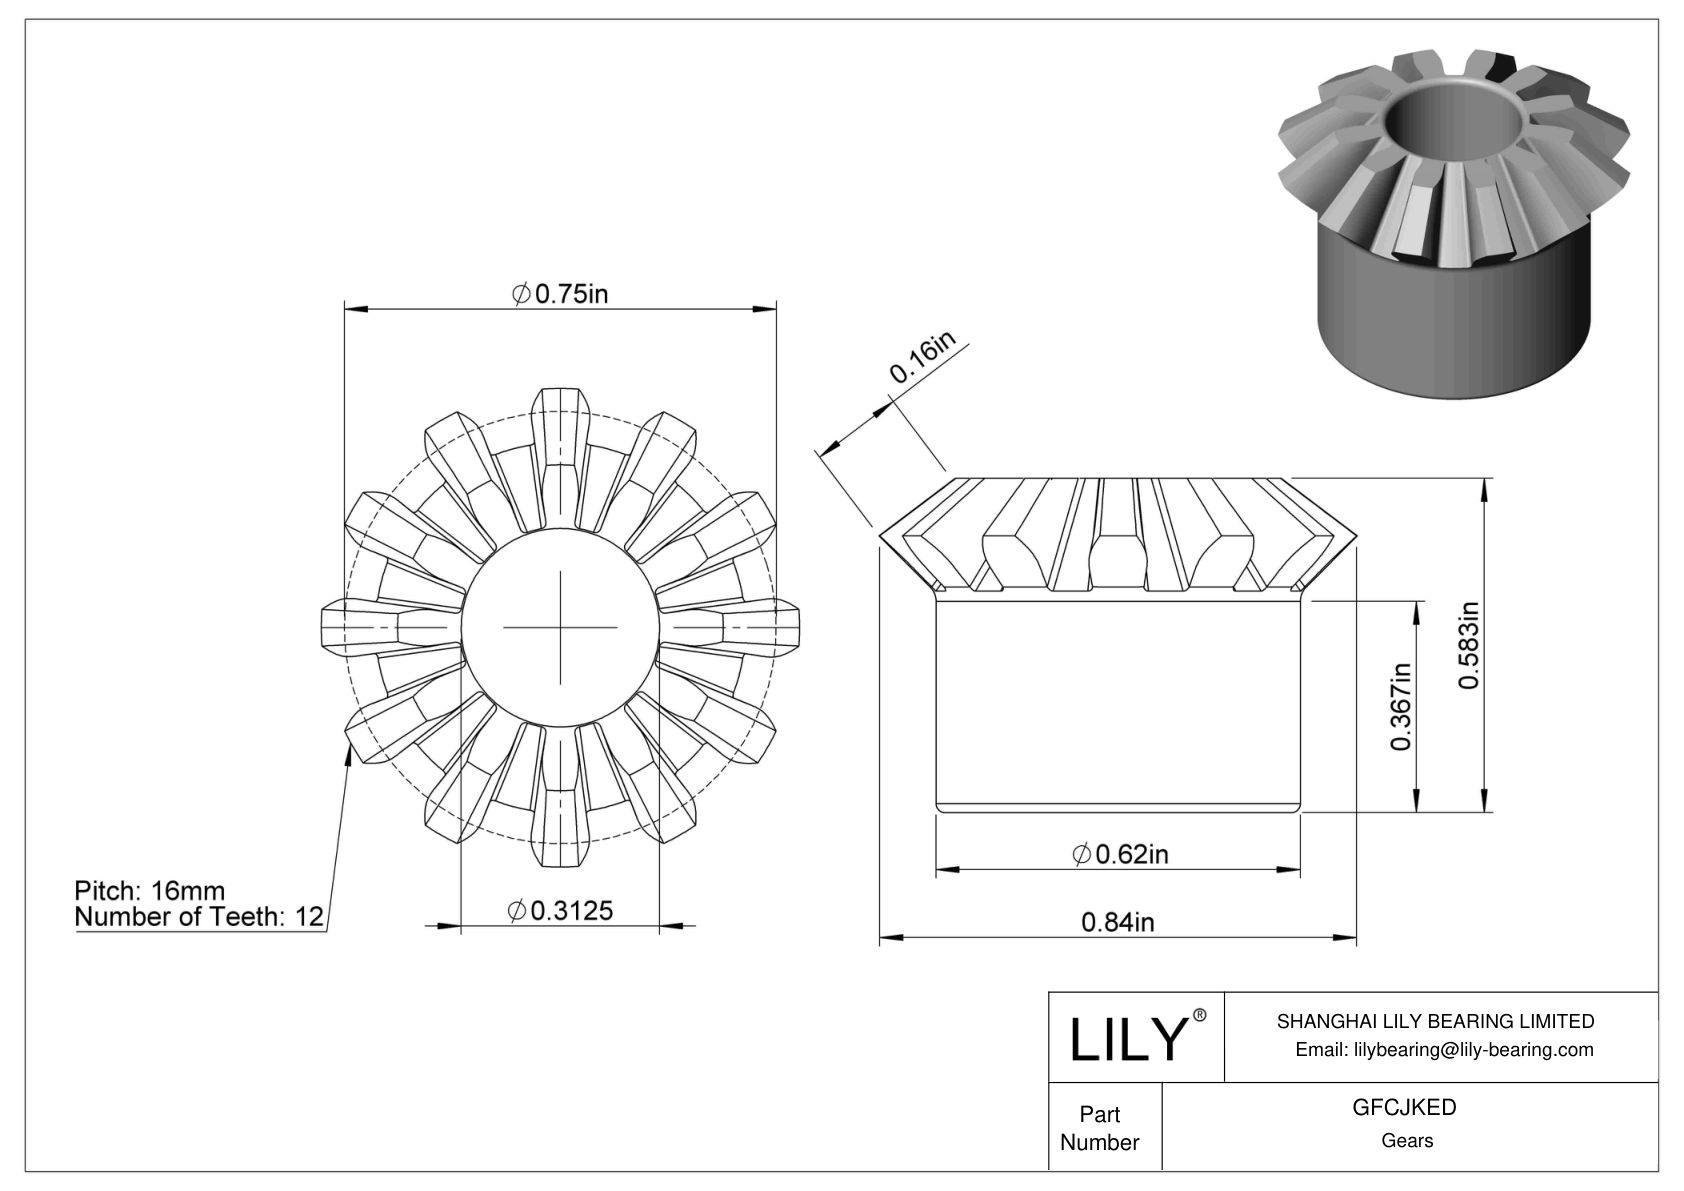 GFCJKED Inch Gears cad drawing